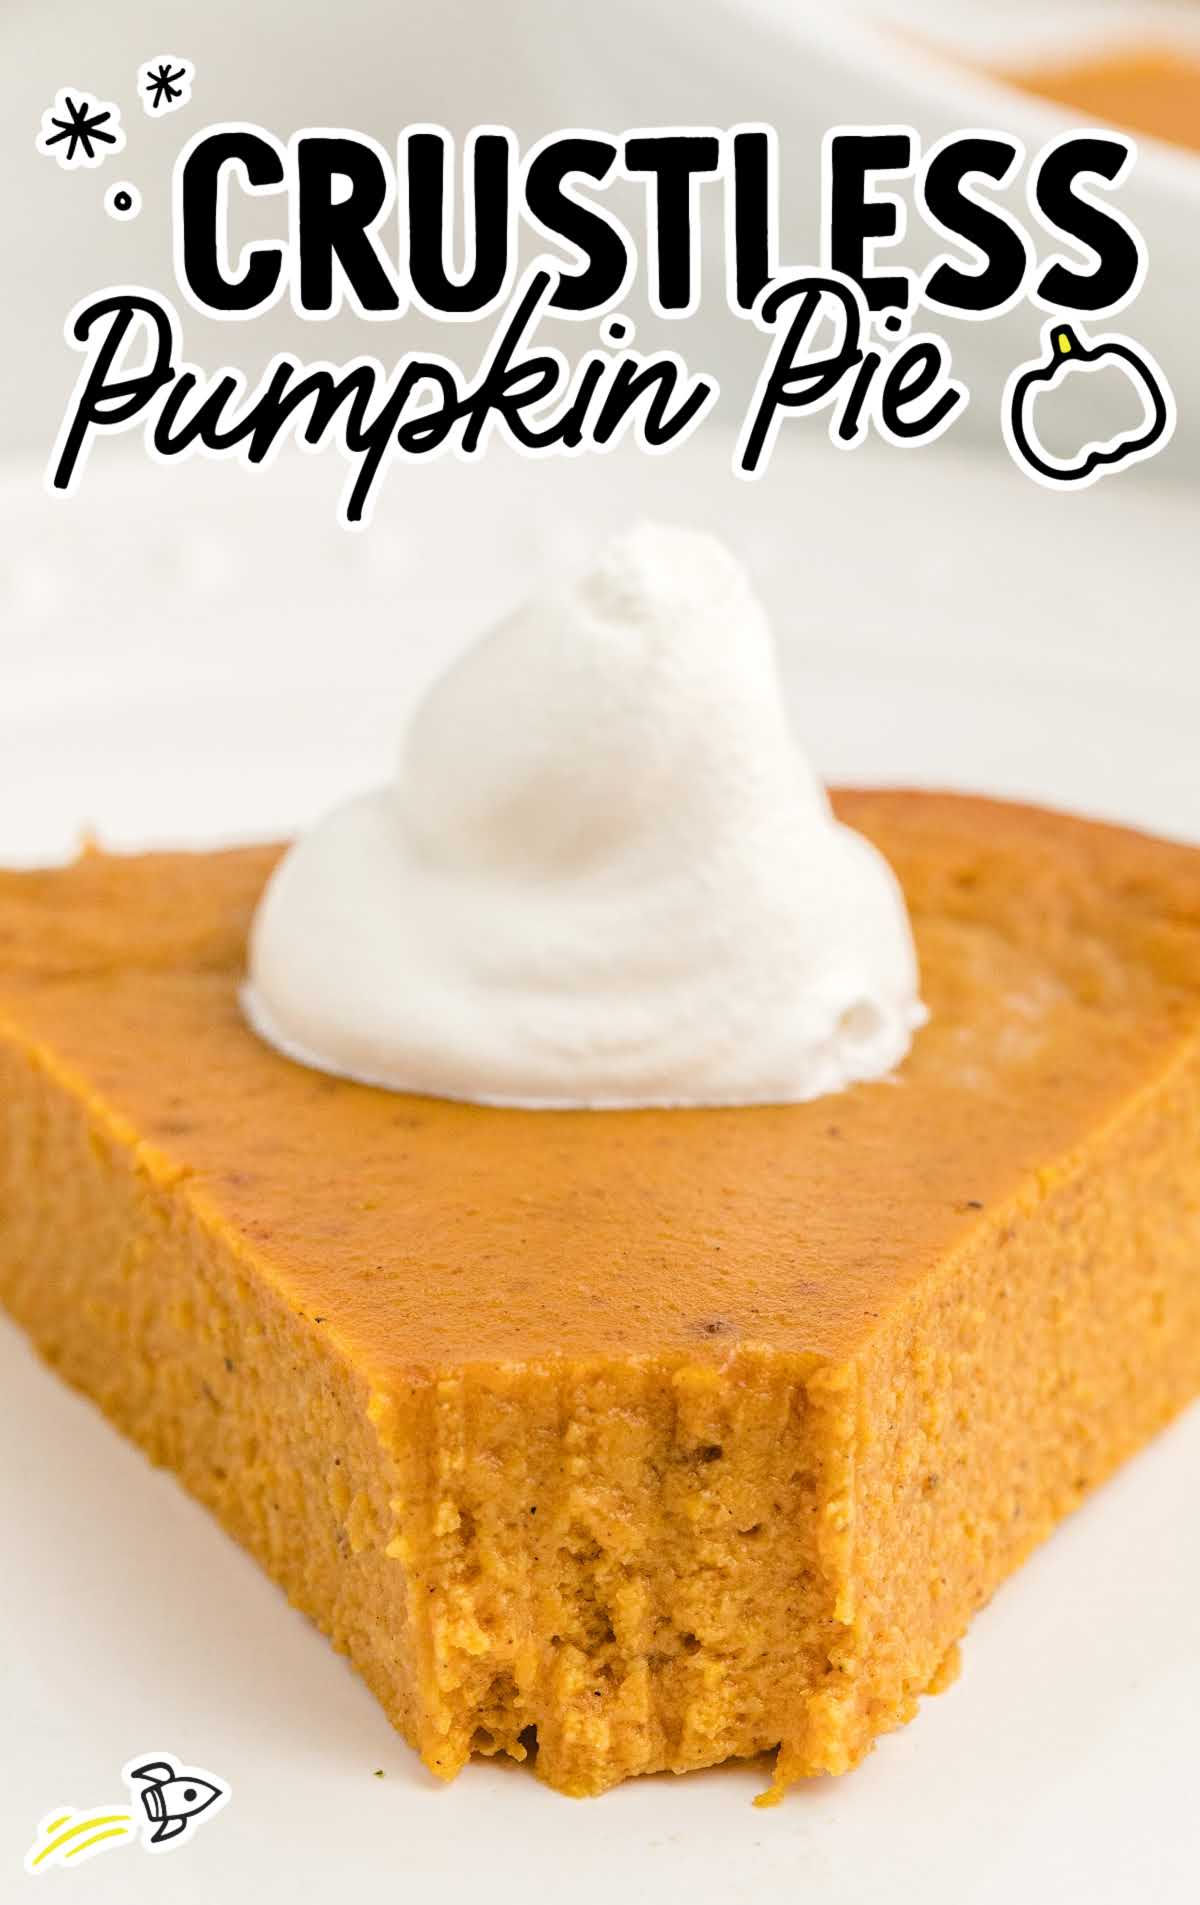 close up of a slice of crustless pumpkin pie with a bite taken out and text overlay